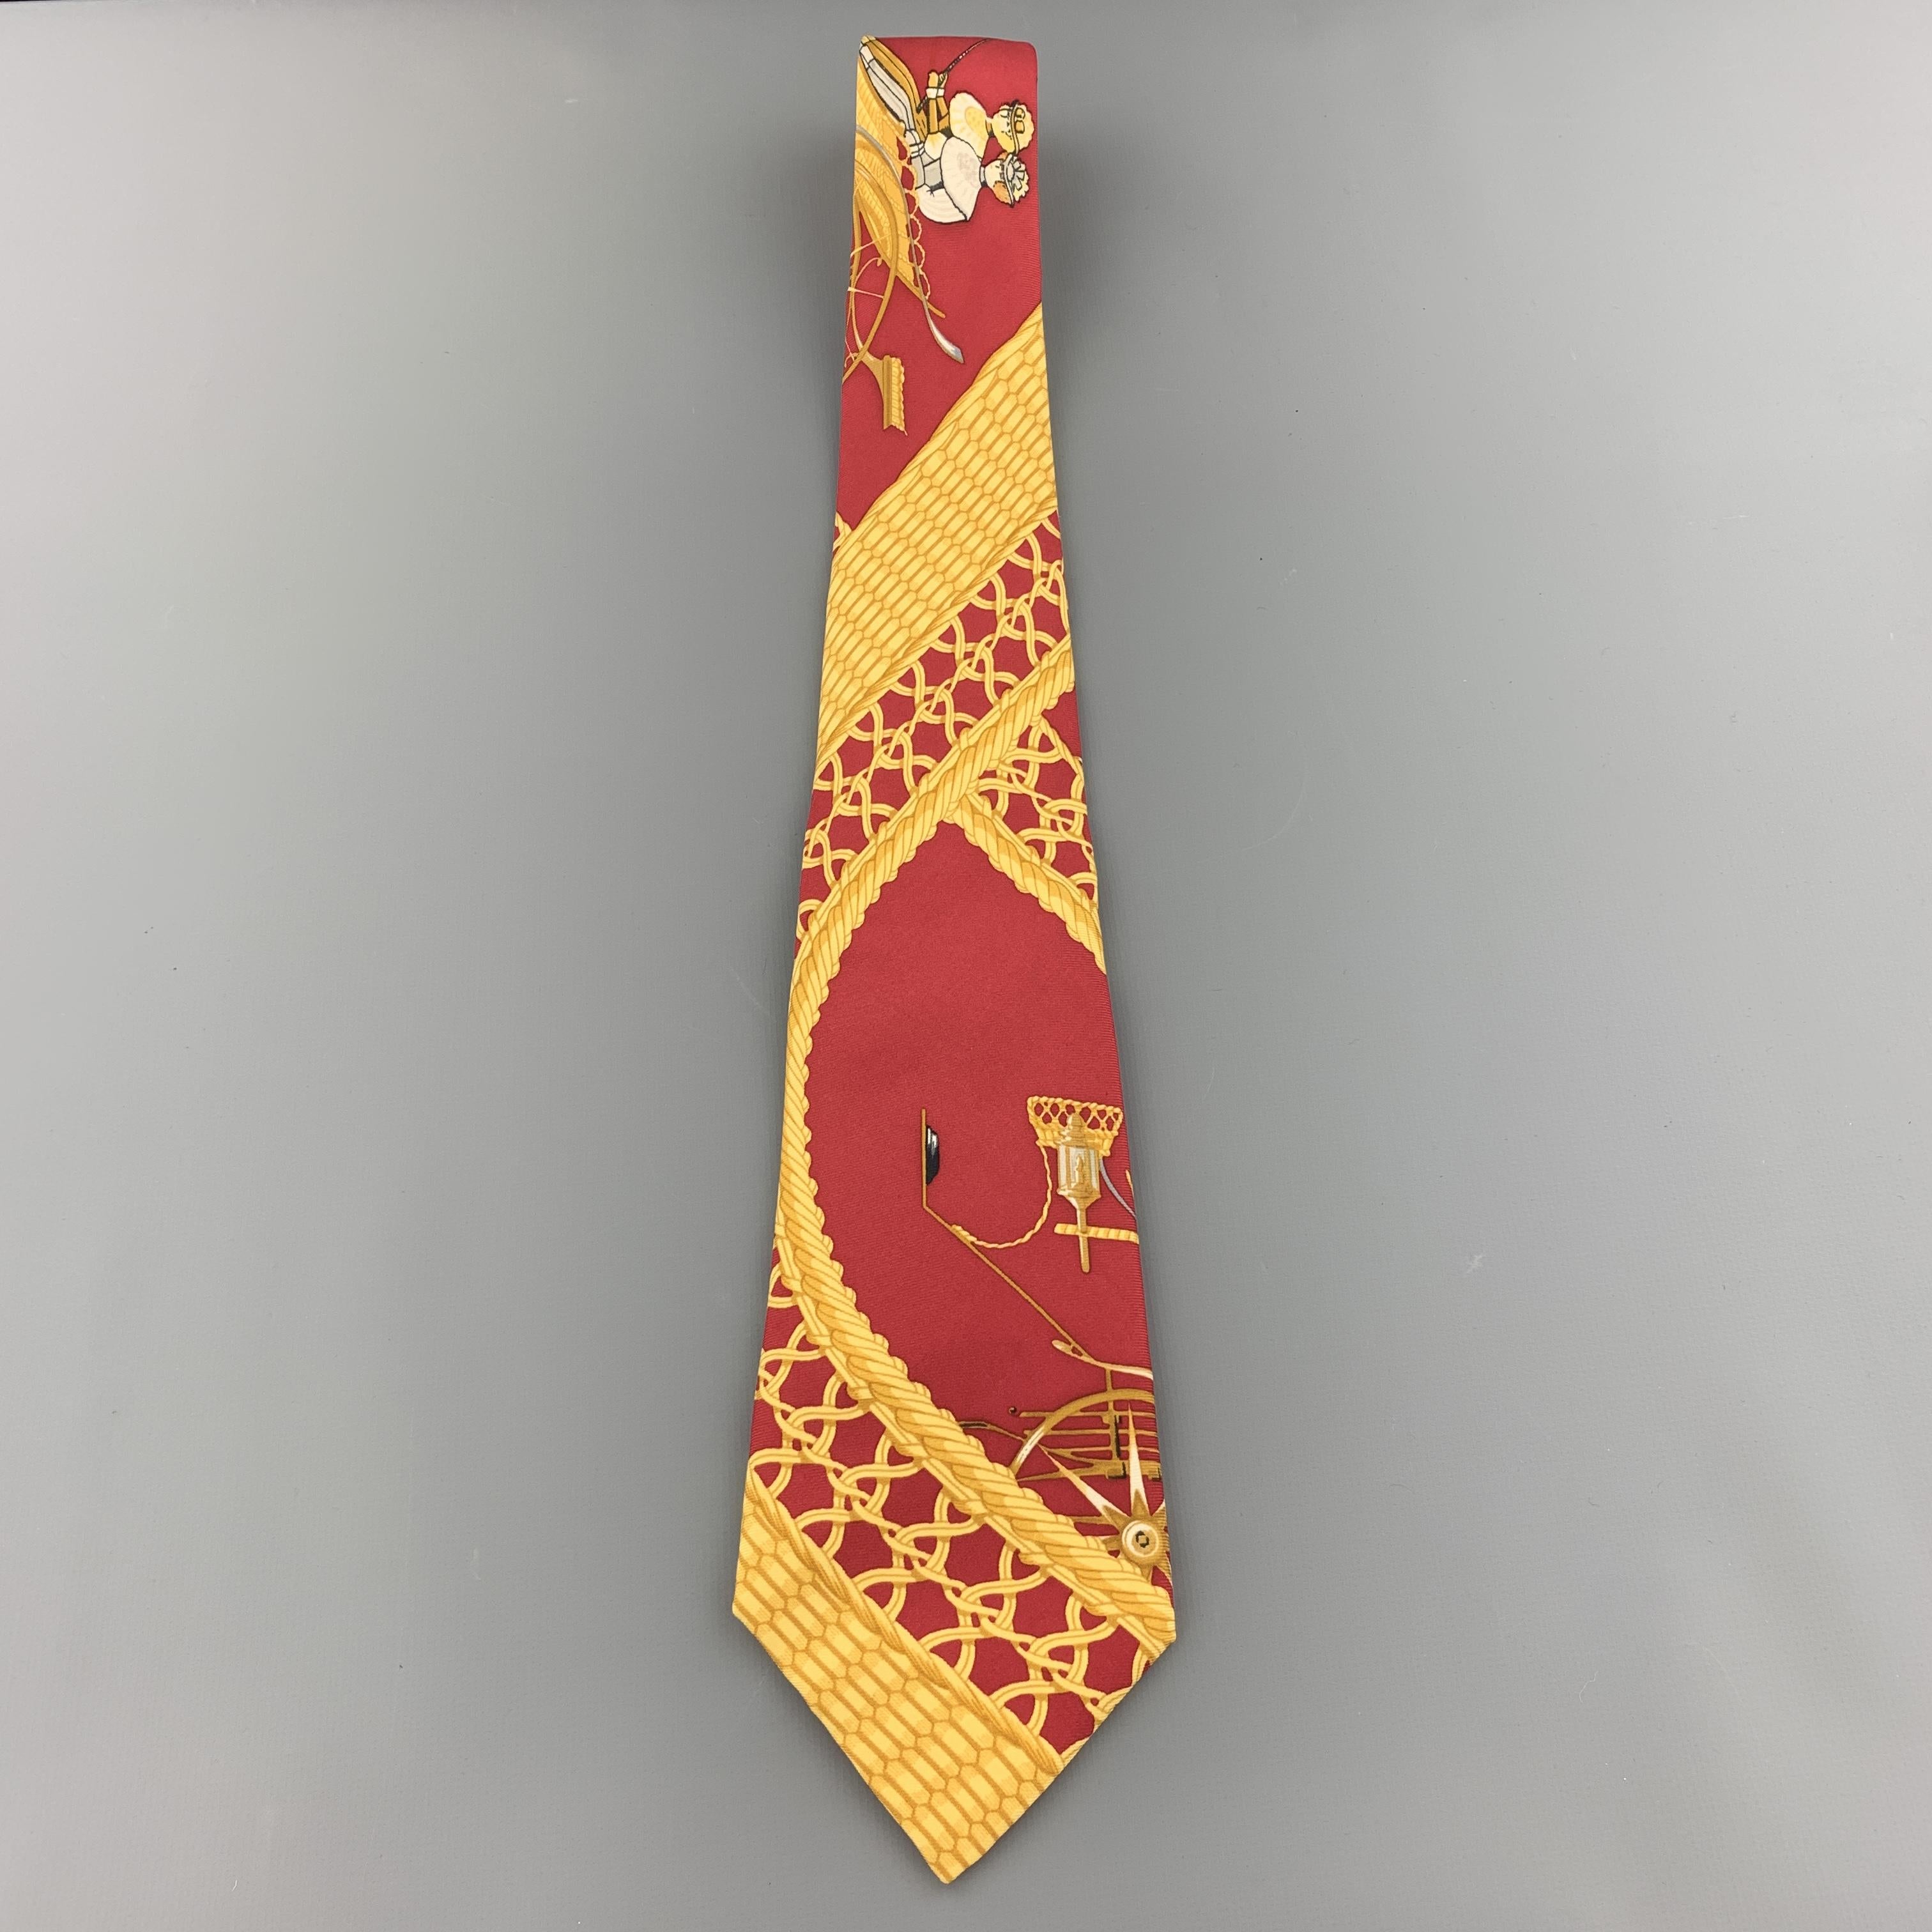 Vintage HERMES necktie comes in burgundy silk twill with all over large scale gold ornate print. Made in France.

Excellent Pre-Owned Condition.

Width: 3.5 in.